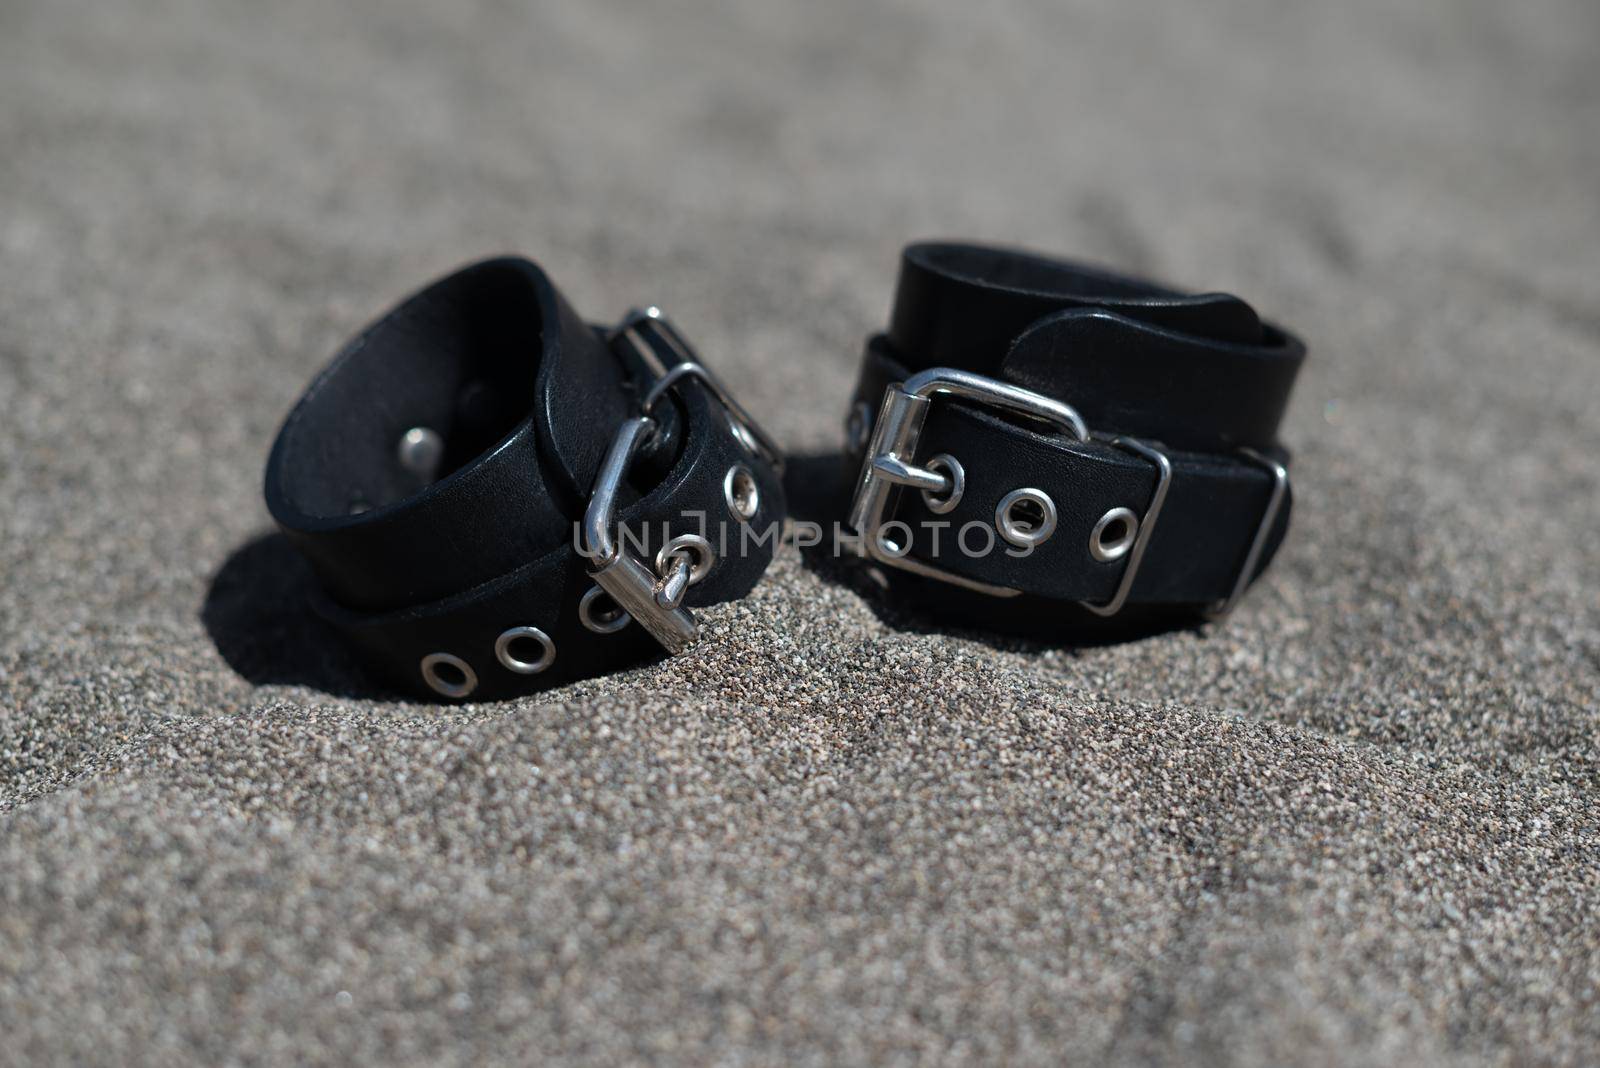 leather handcuffs for bdsm sex toys on a sandy beach